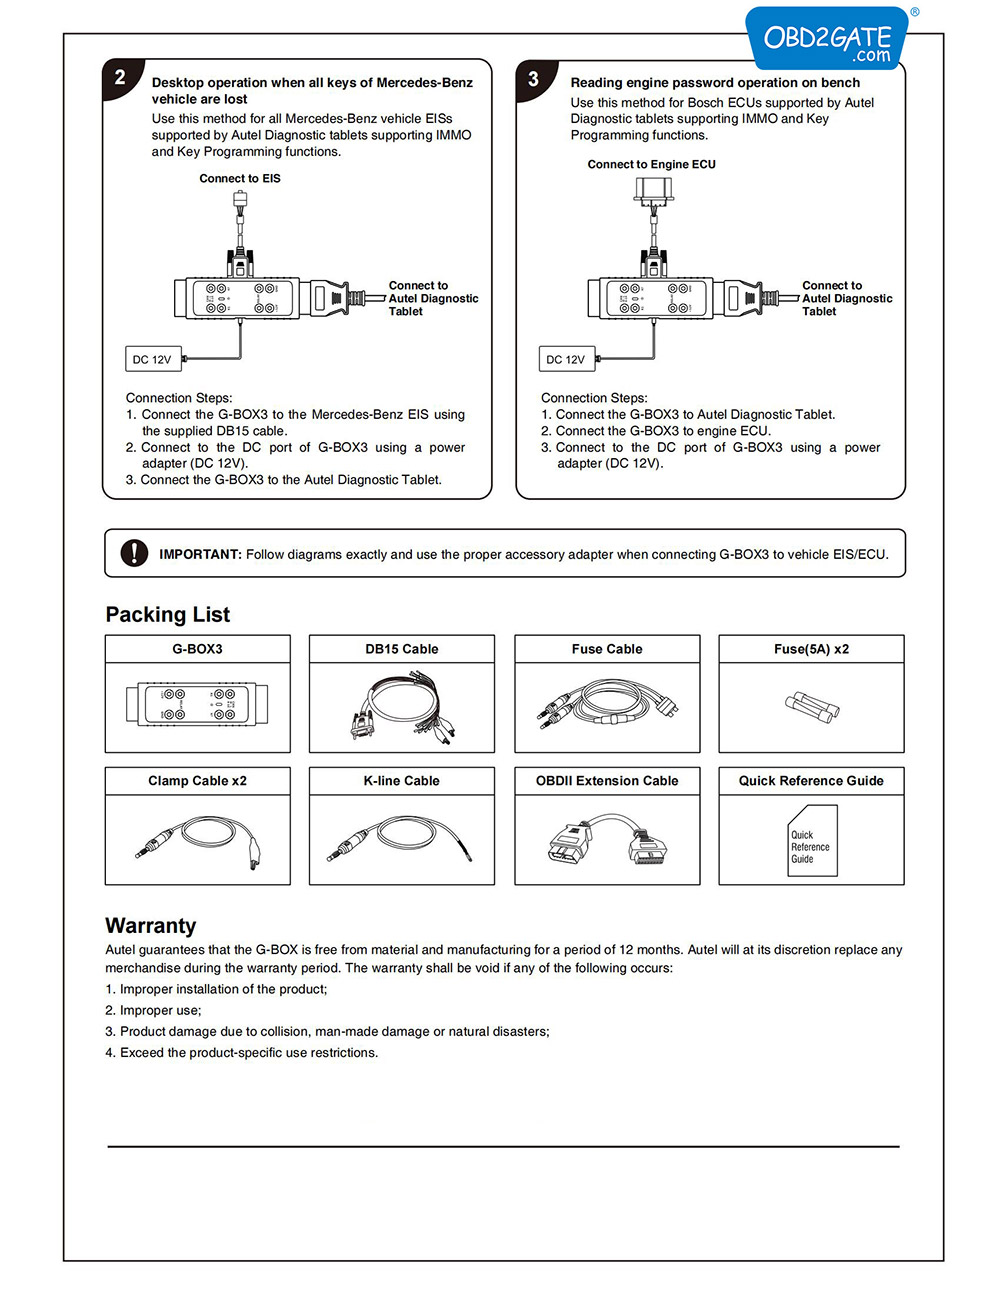 Autel G Box3 Quick Reference Guide-02